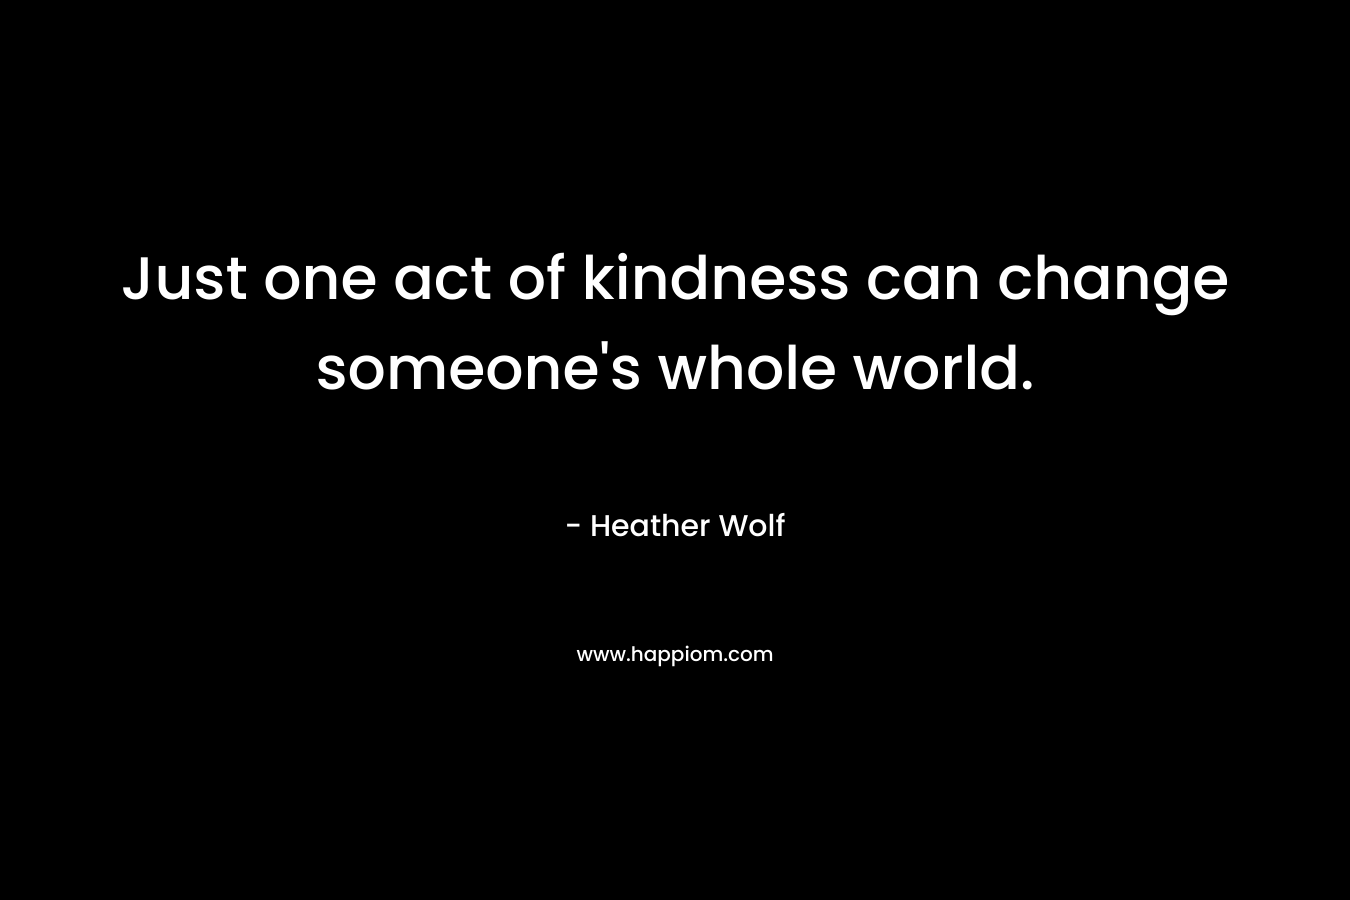 Just one act of kindness can change someone’s whole world. – Heather Wolf